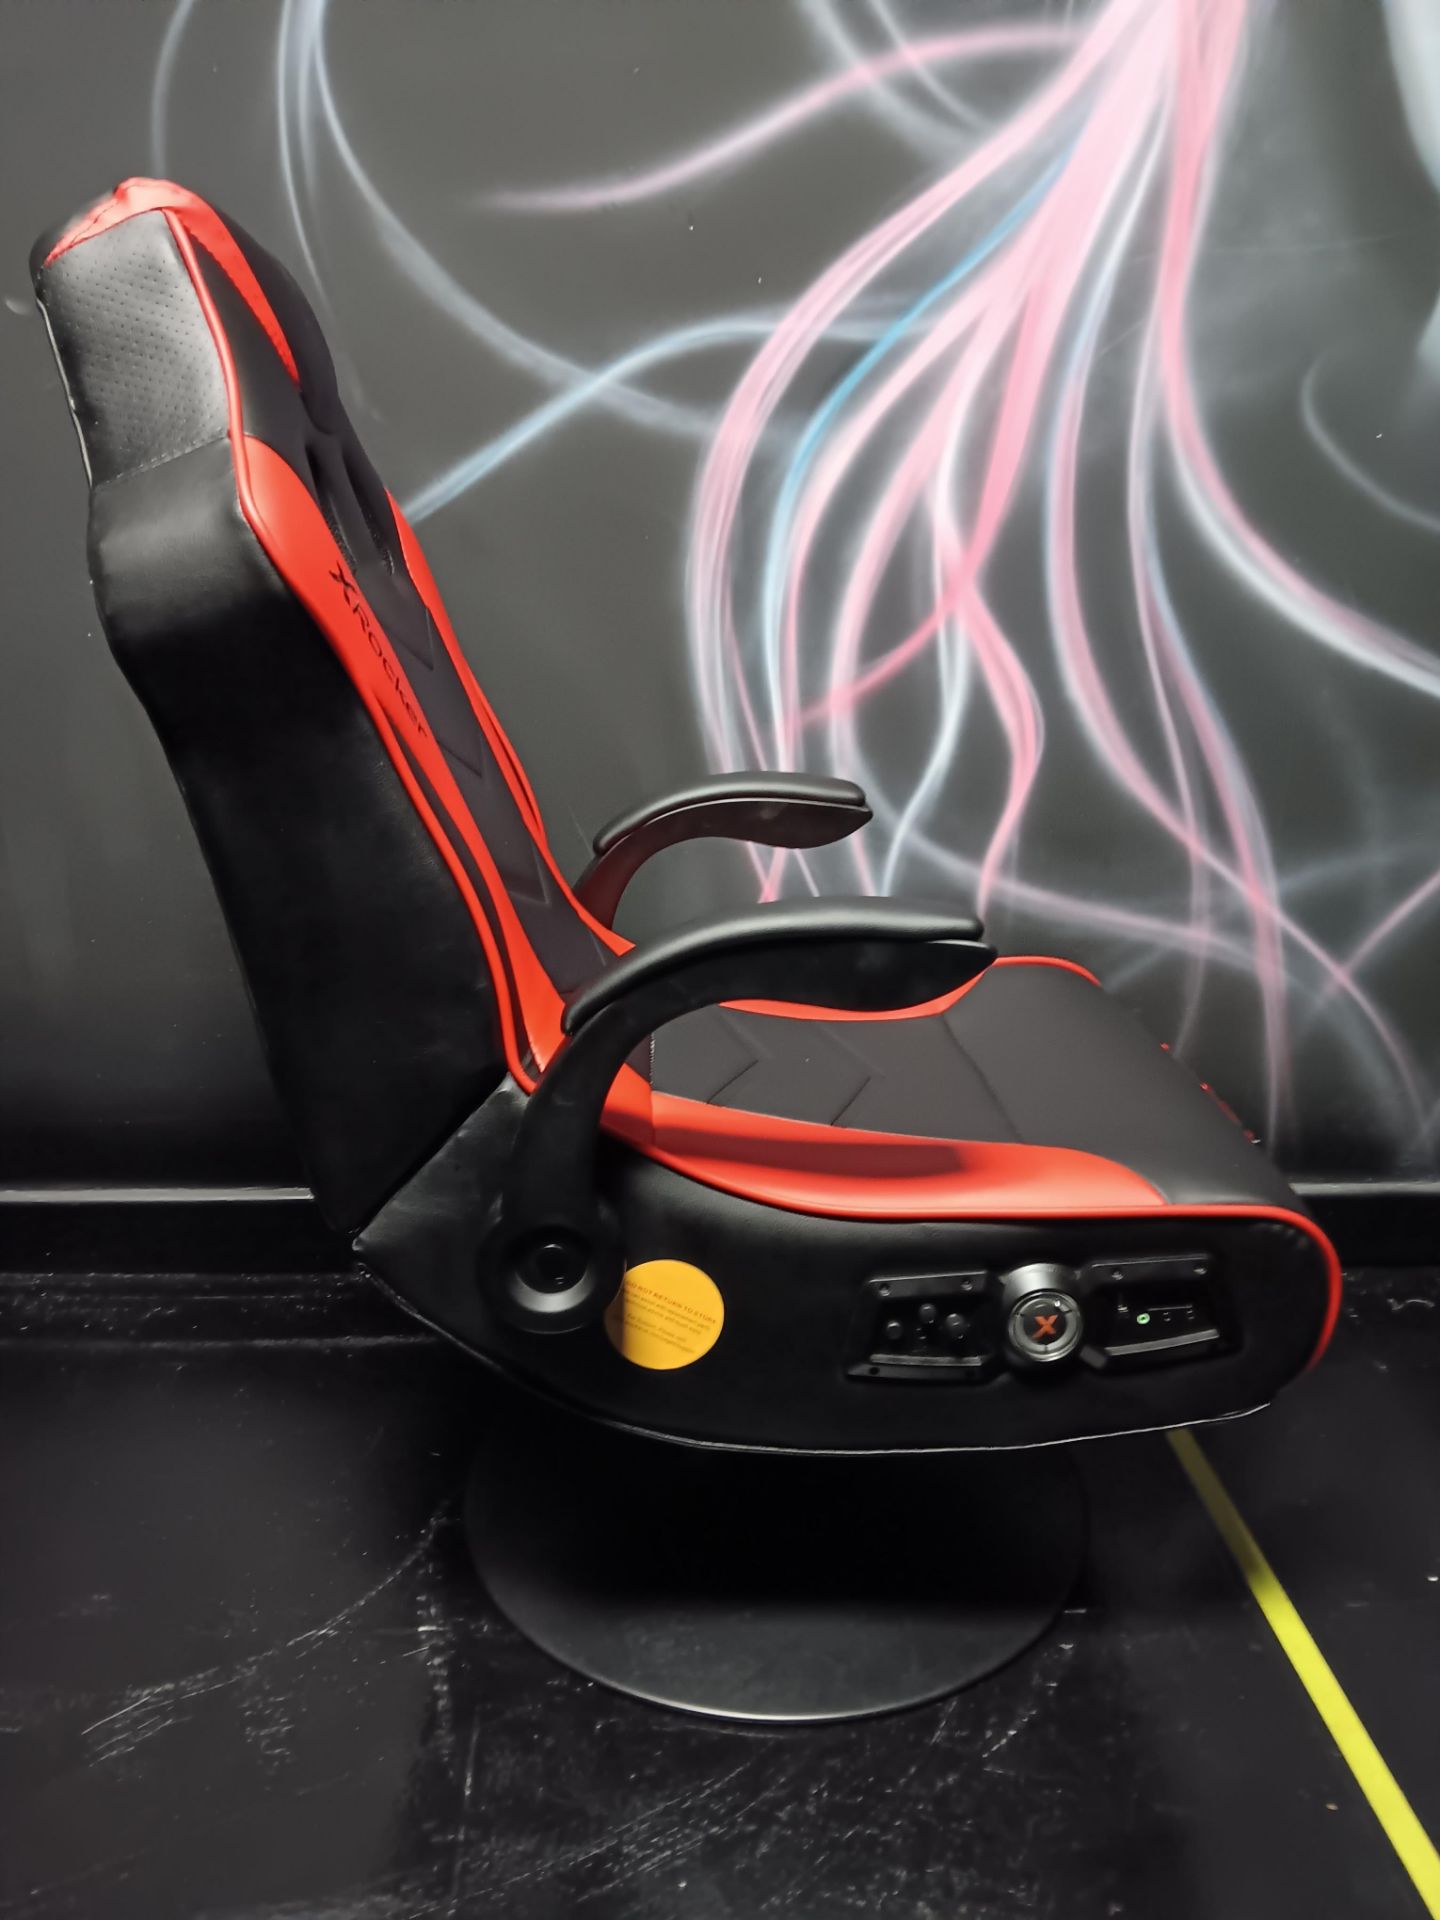 X Rocker Viper Wireless Gaming Chair - Image 2 of 4